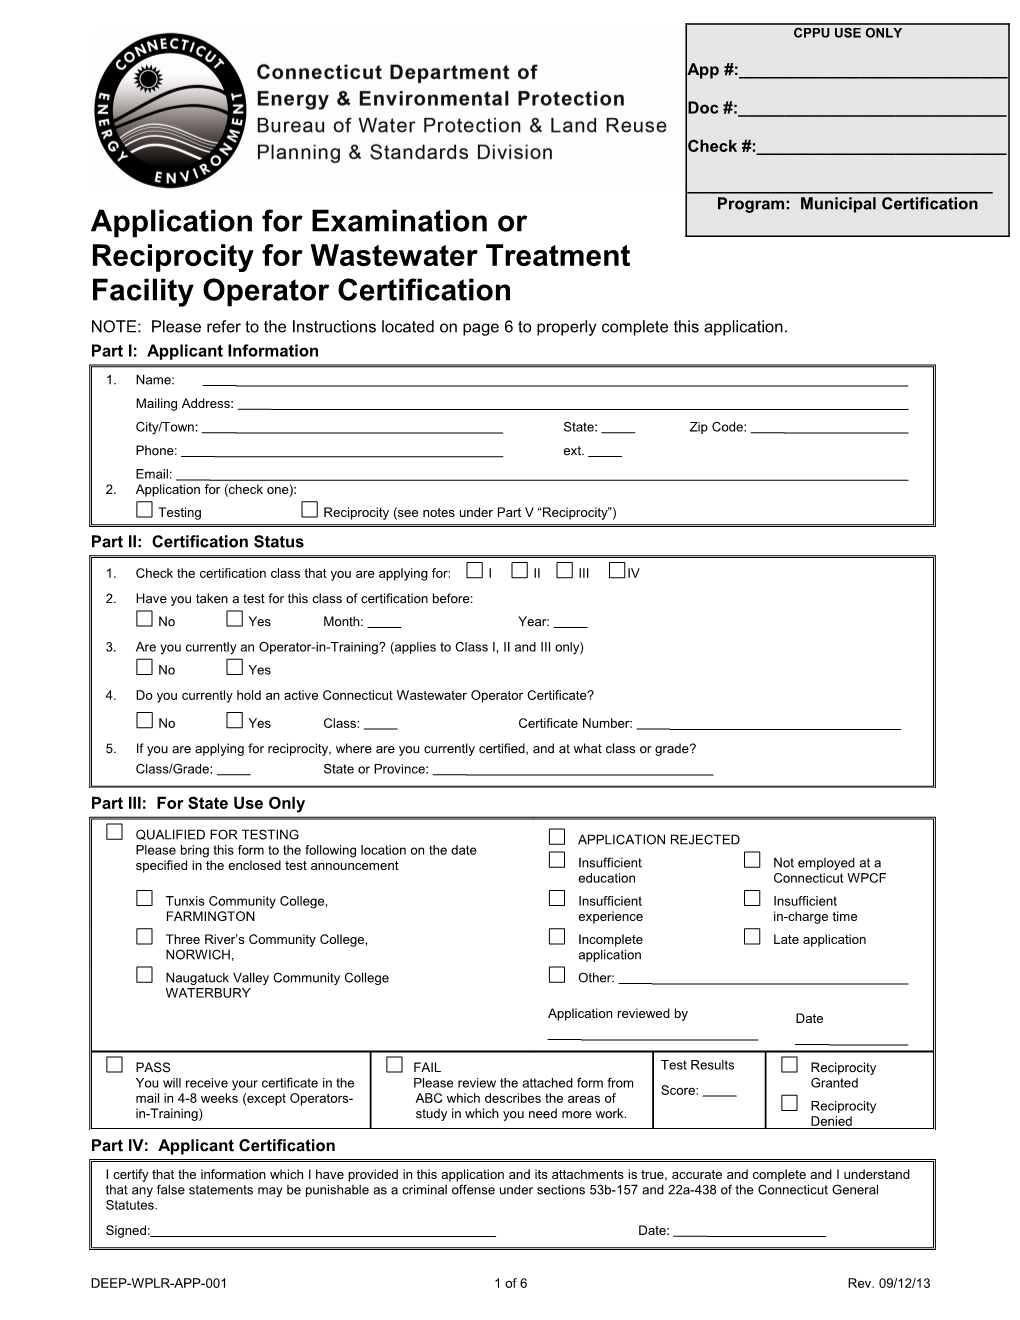 Application for Examination Or Reciprocity for Wastewater Treatment Facility Operator